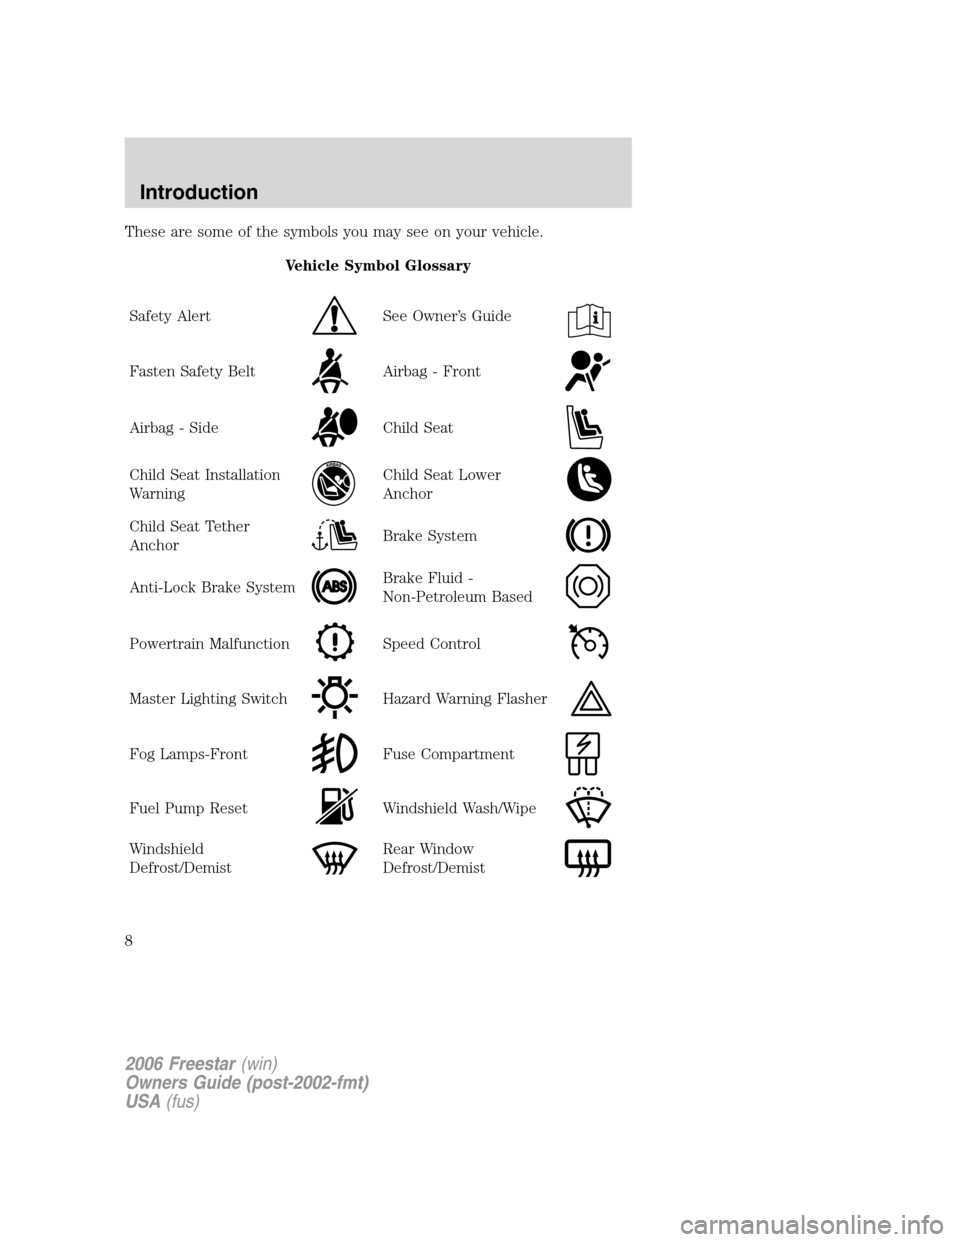 FORD FREESTAR 2006 1.G Owners Manual These are some of the symbols you may see on your vehicle.
Vehicle Symbol Glossary
Safety Alert
See Owner’s Guide
Fasten Safety BeltAirbag - Front
Airbag - SideChild Seat
Child Seat Installation
War